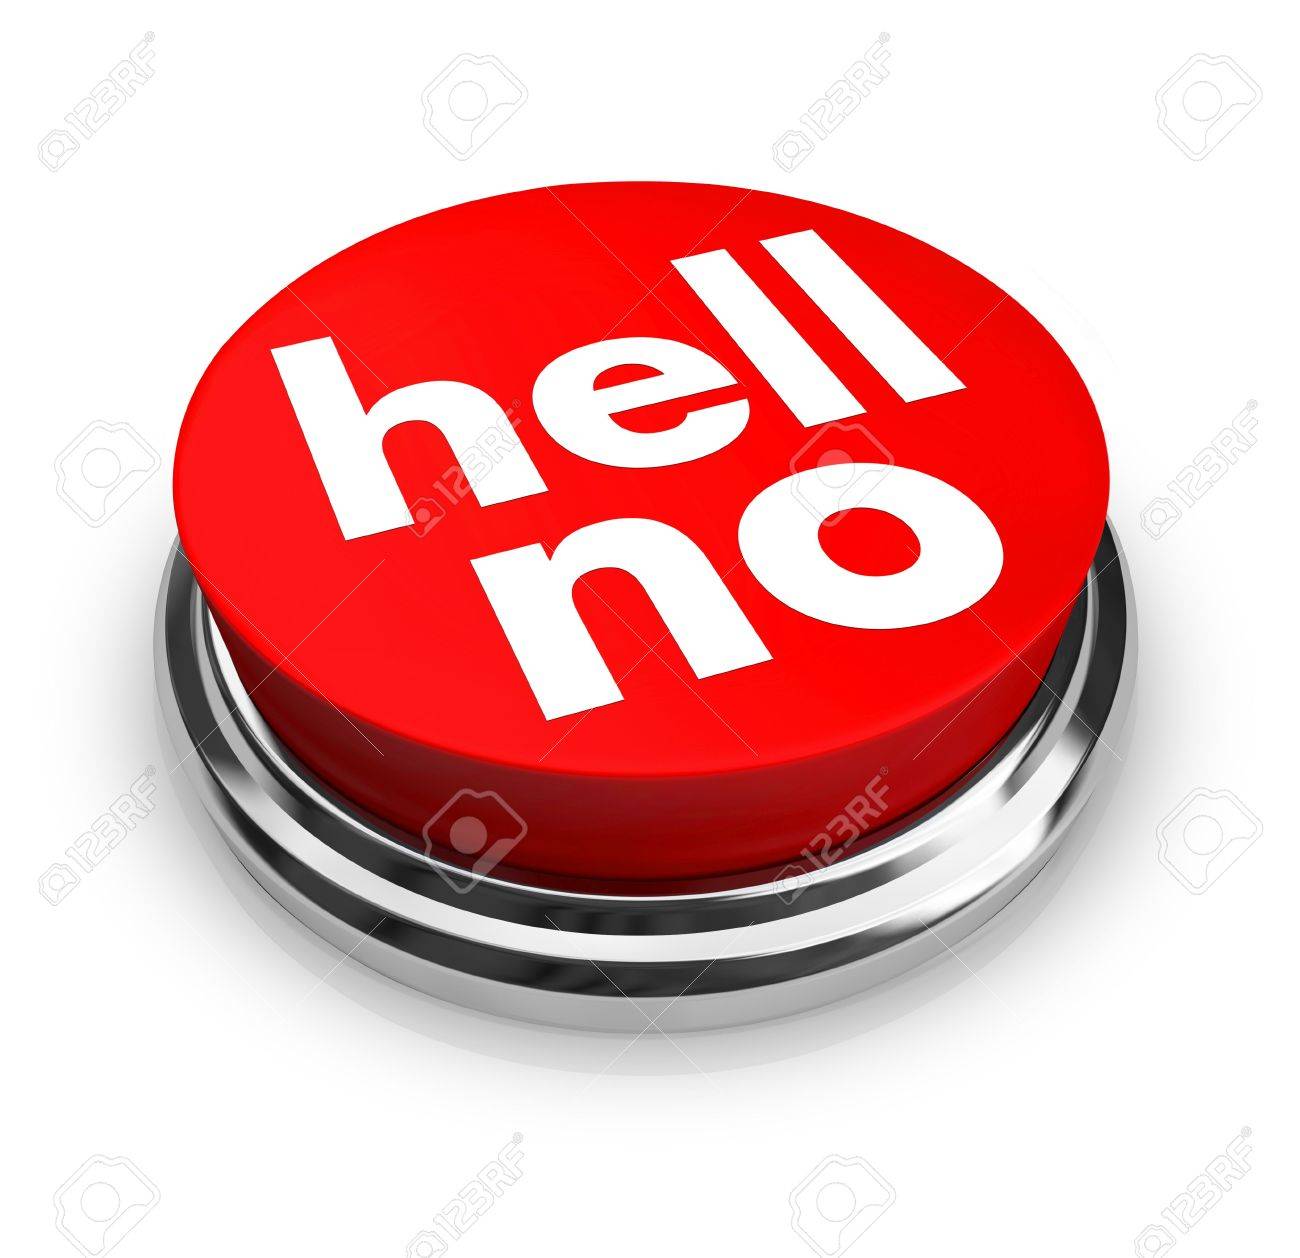 5054741-a-red-button-with-the-words-hell-no-on-it.jpg